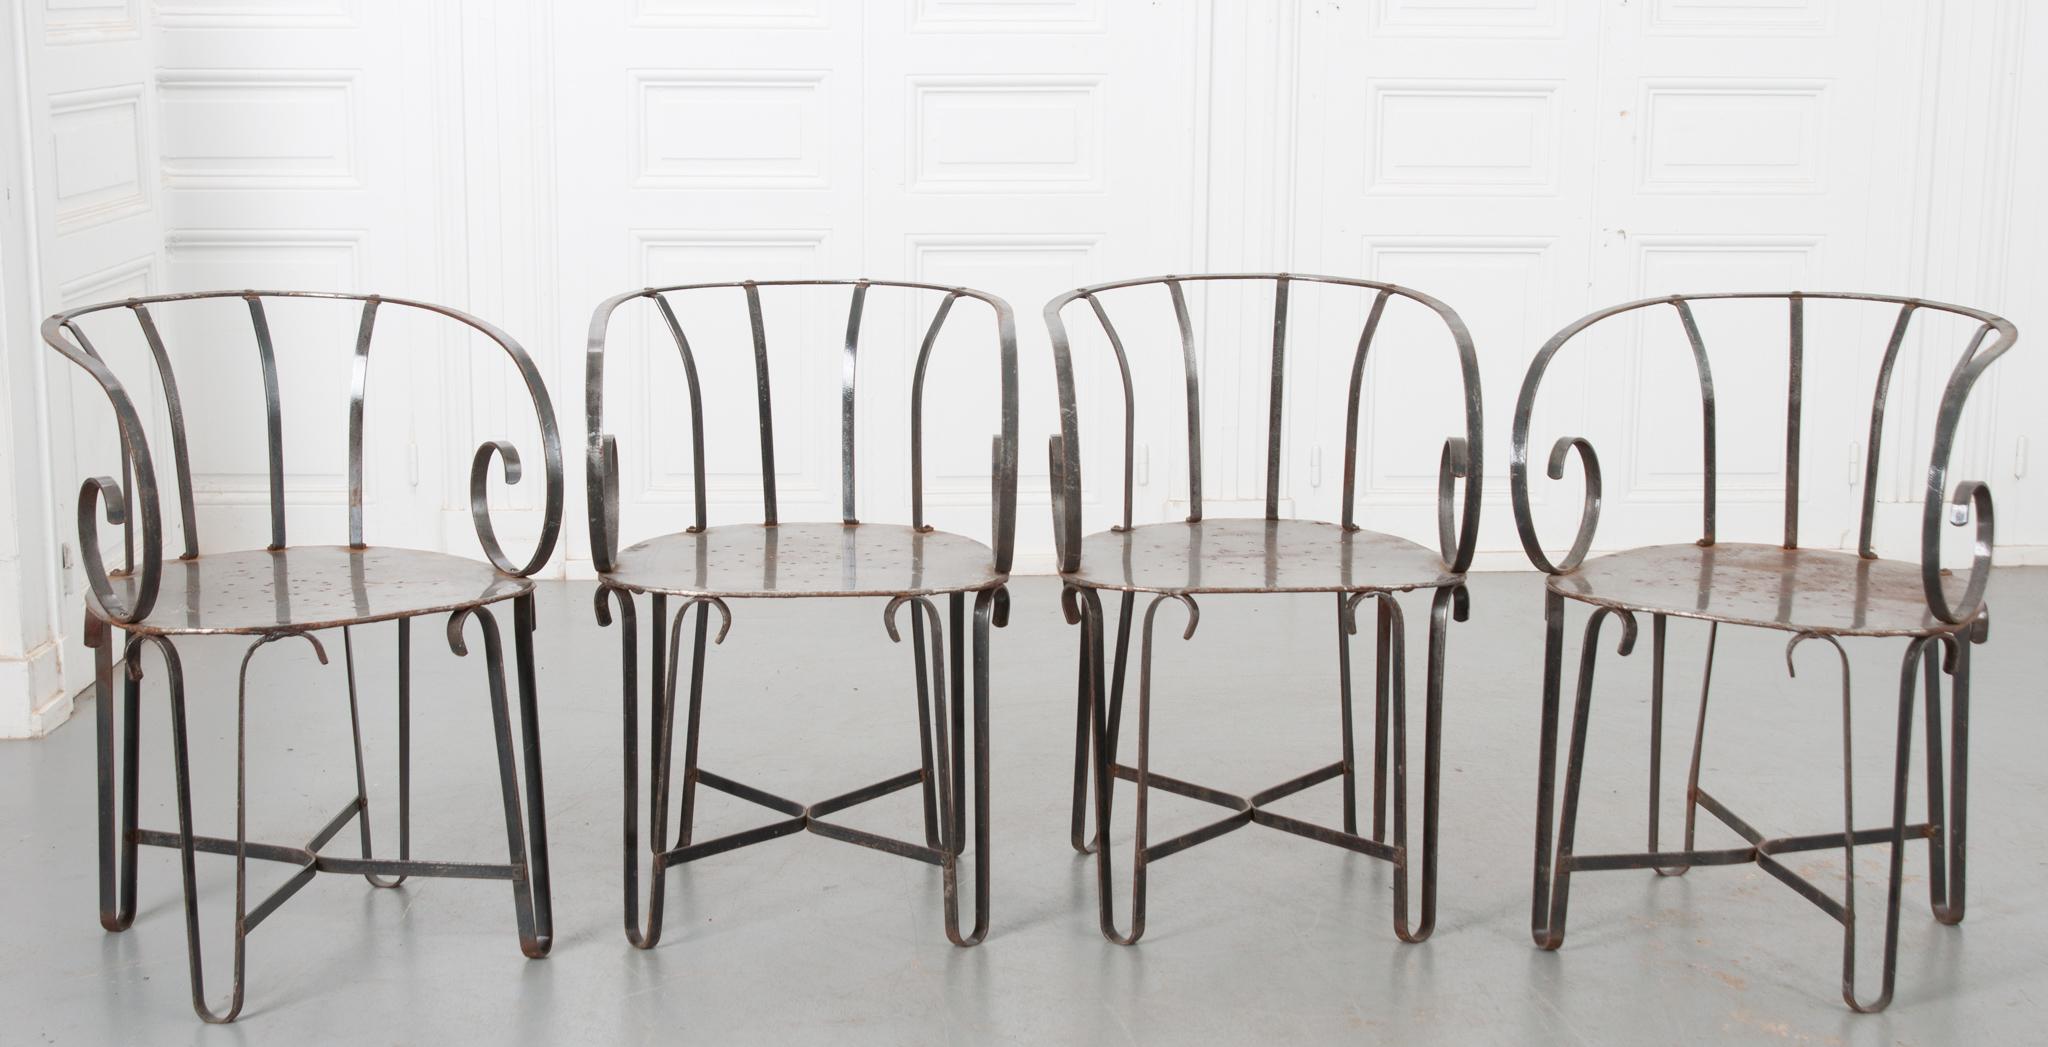 20th Century Set of 4 Vintage Scroll Arm Metal Chairs